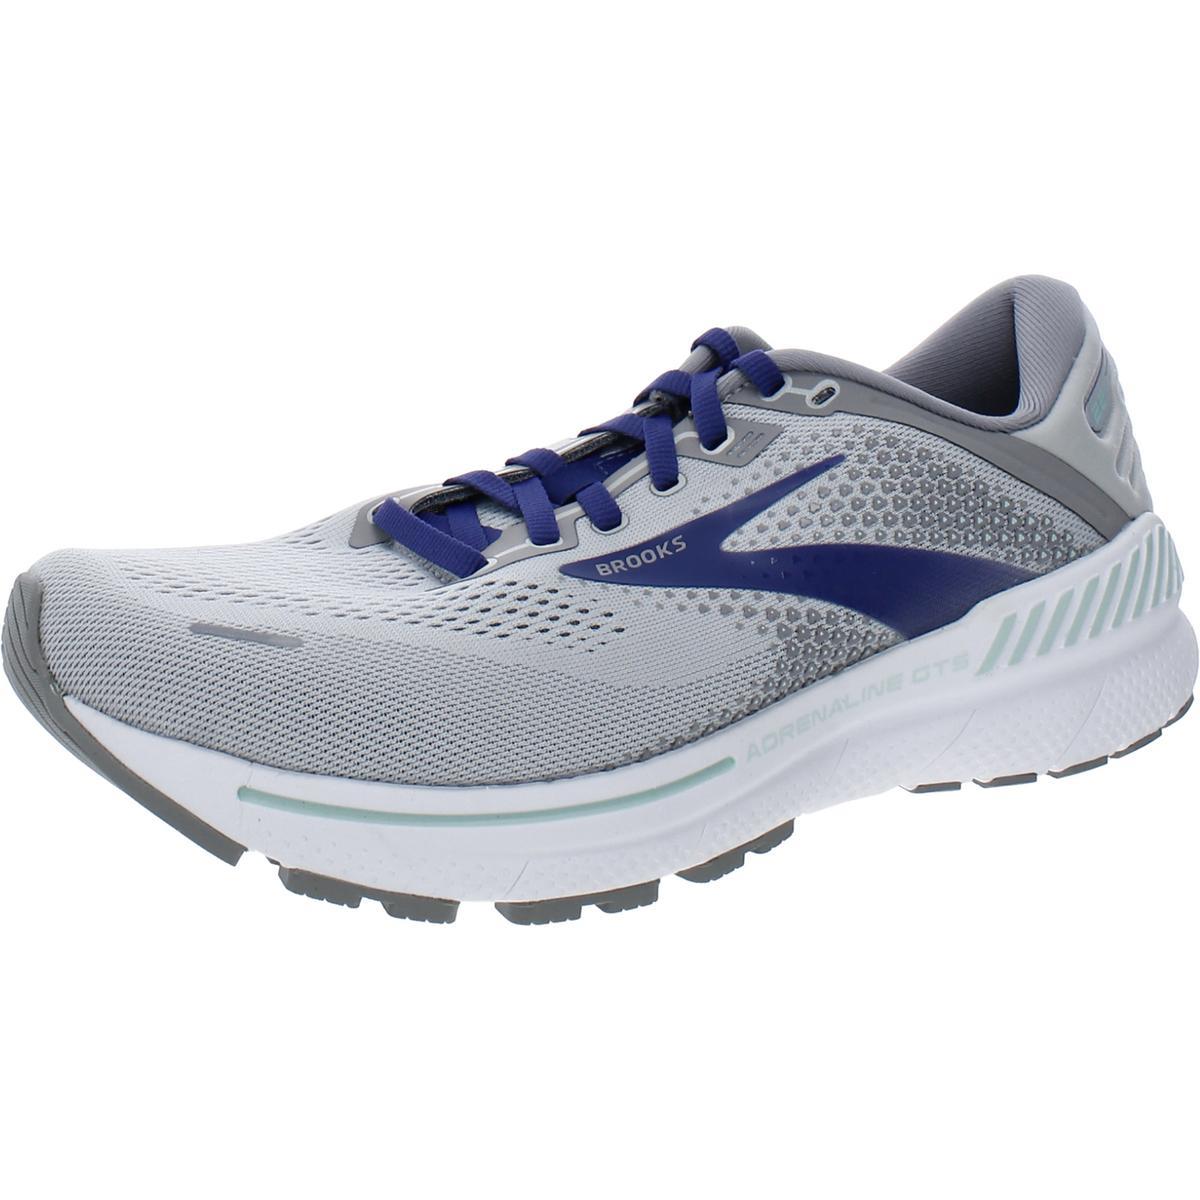 Brooks Womens Adrenaline Gts 22 Athletic and Training Shoes Sneakers Bhfo 7537 Grey/Purple